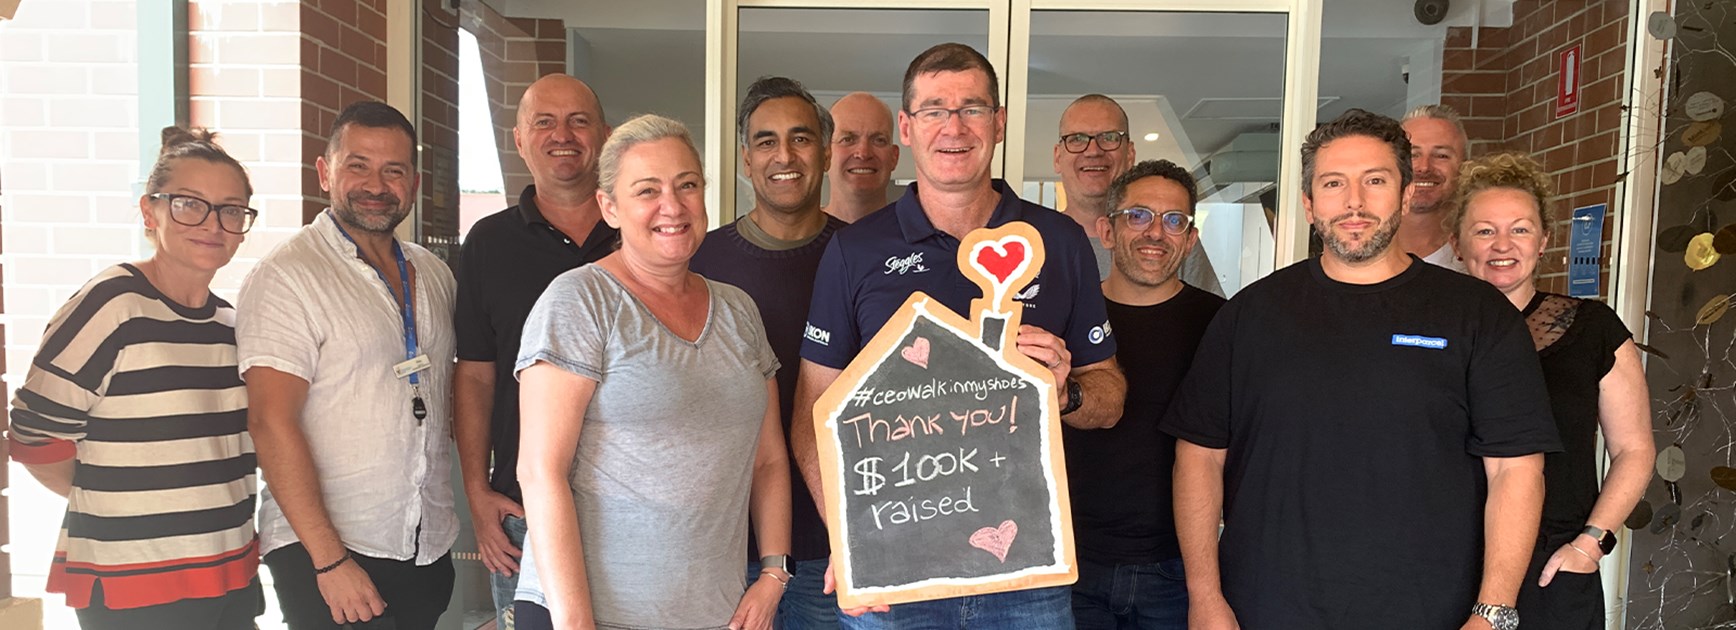 Roosters Help Raise Over $100,000 Through CEO Walk In My Shoes Campaign